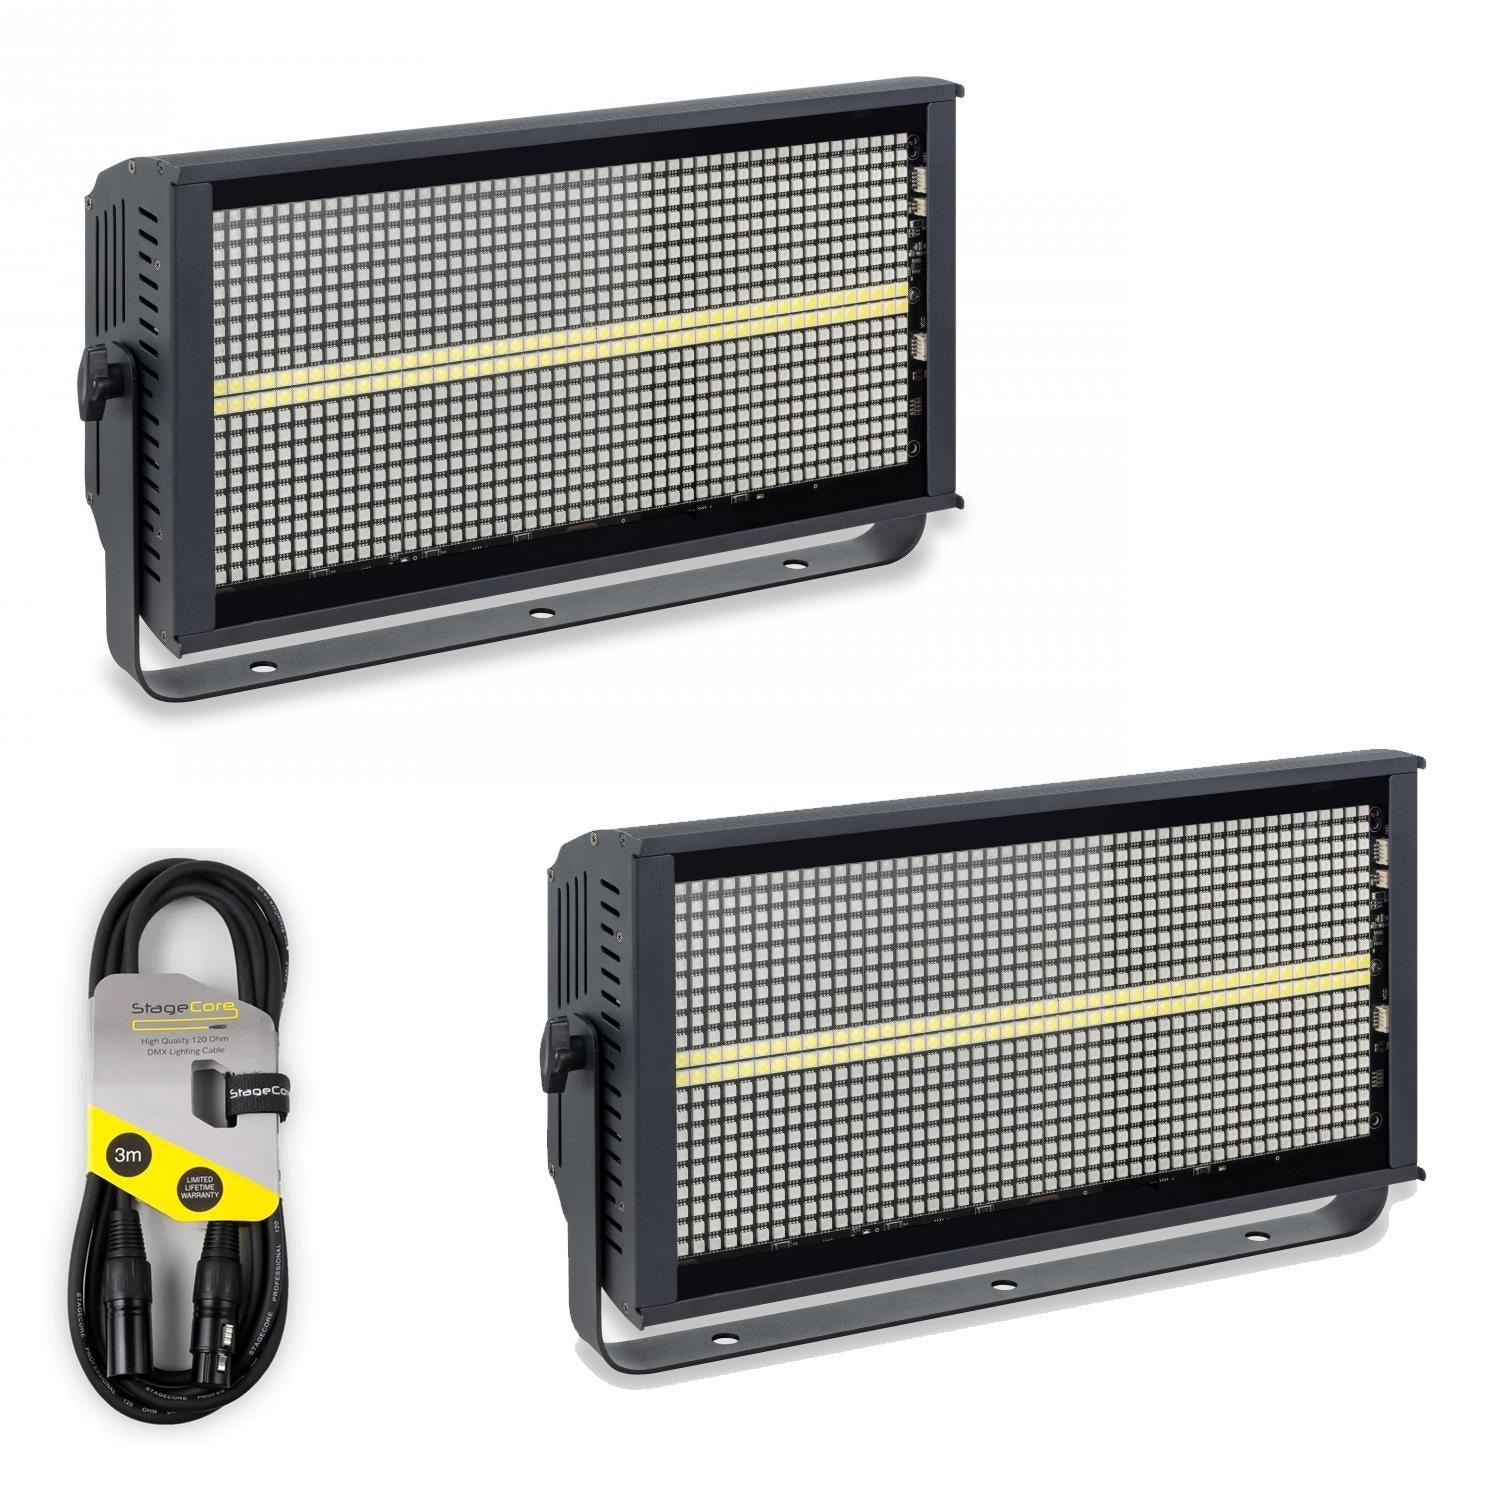 2 x Centolight Lightblaster S960 Wash and Strobe LED Panel With DMX Cable - DY Pro Audio